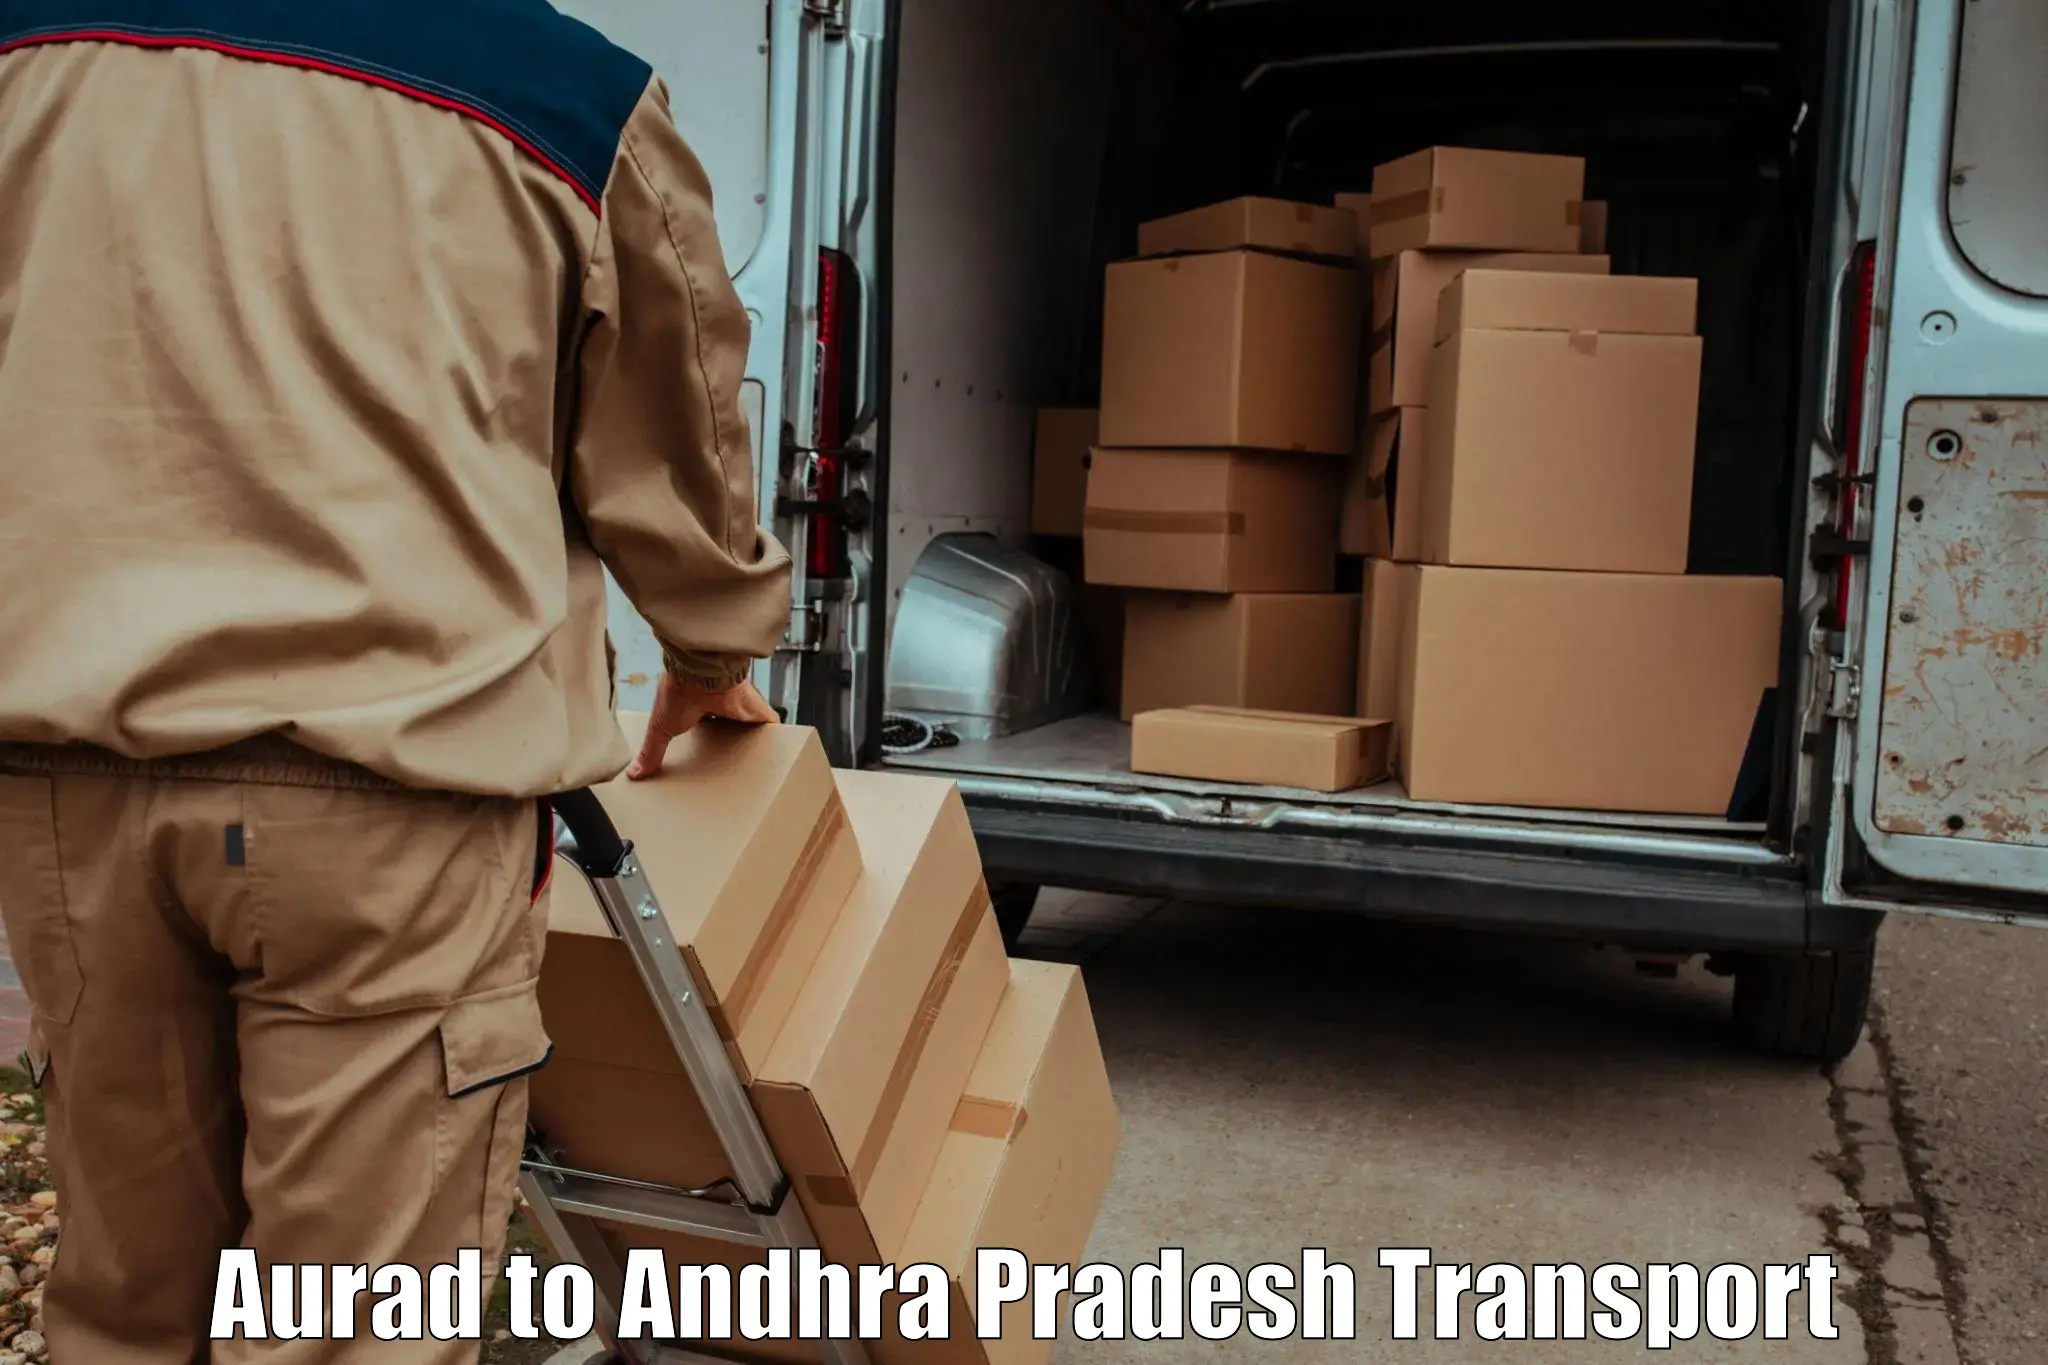 Air freight transport services Aurad to Bhattiprolu